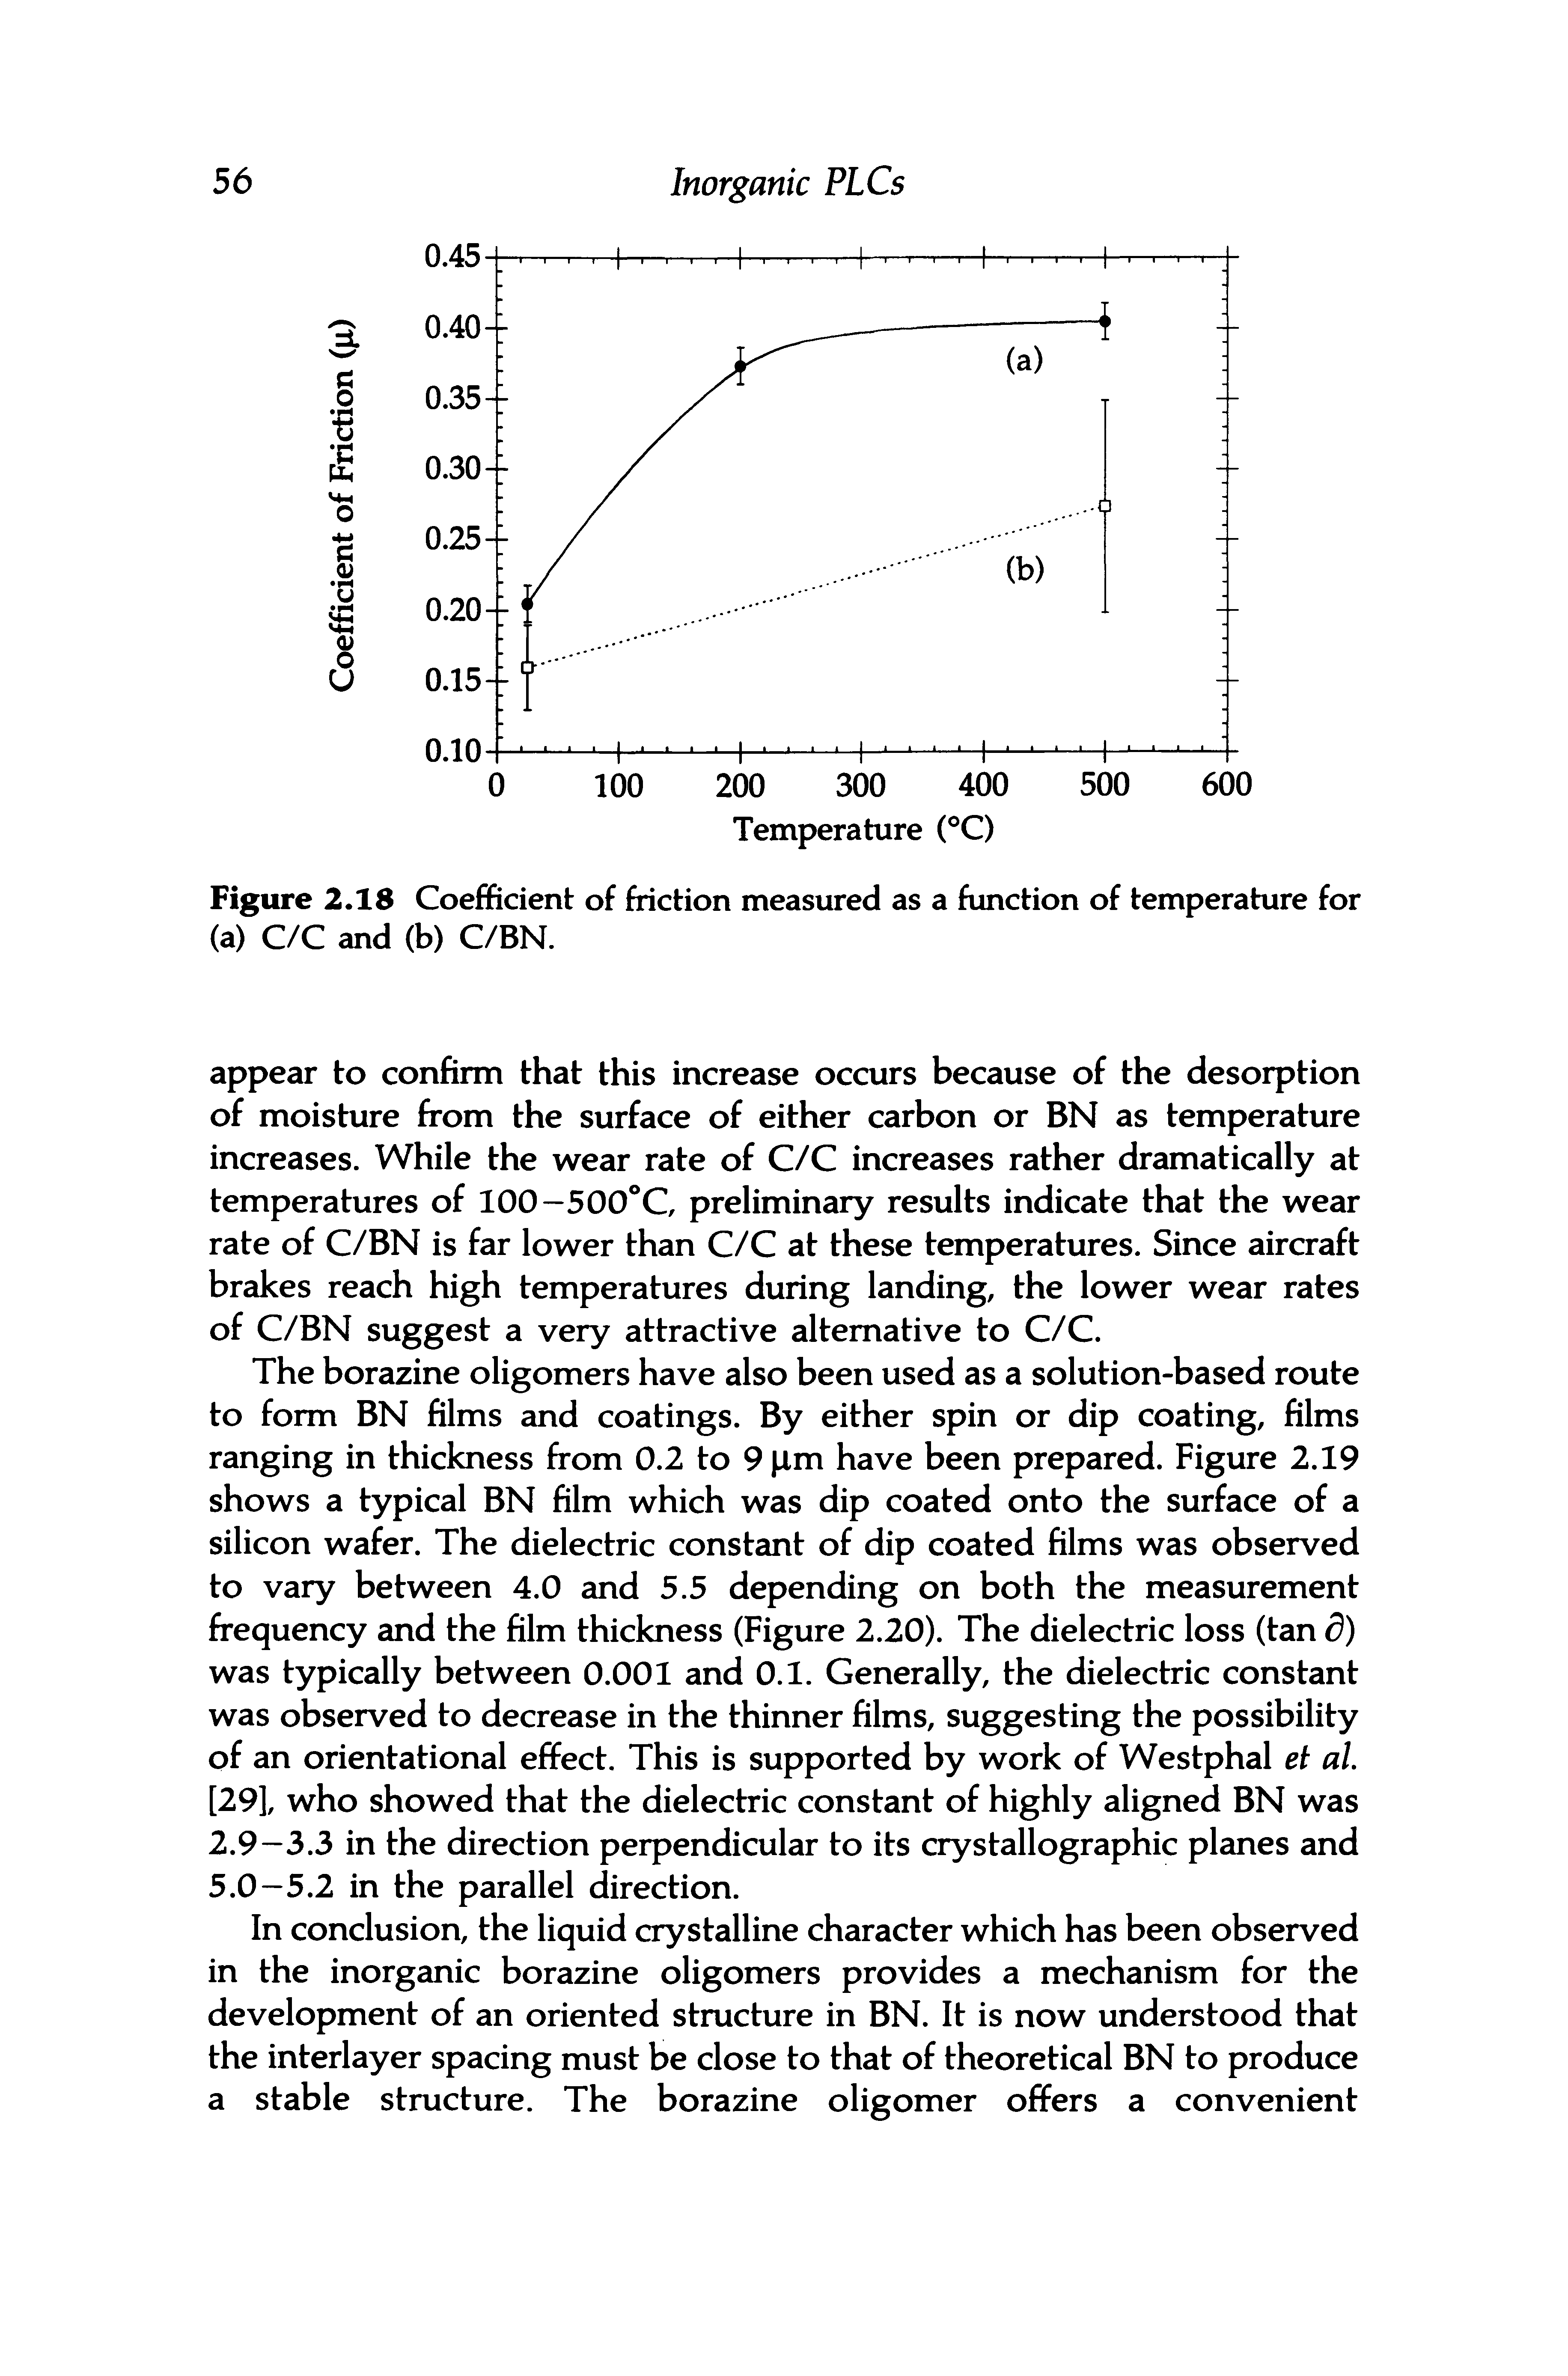 Figure 2.18 Coefficient of friction measured as a function of temperature for (a) C/C and (b) C/BN.